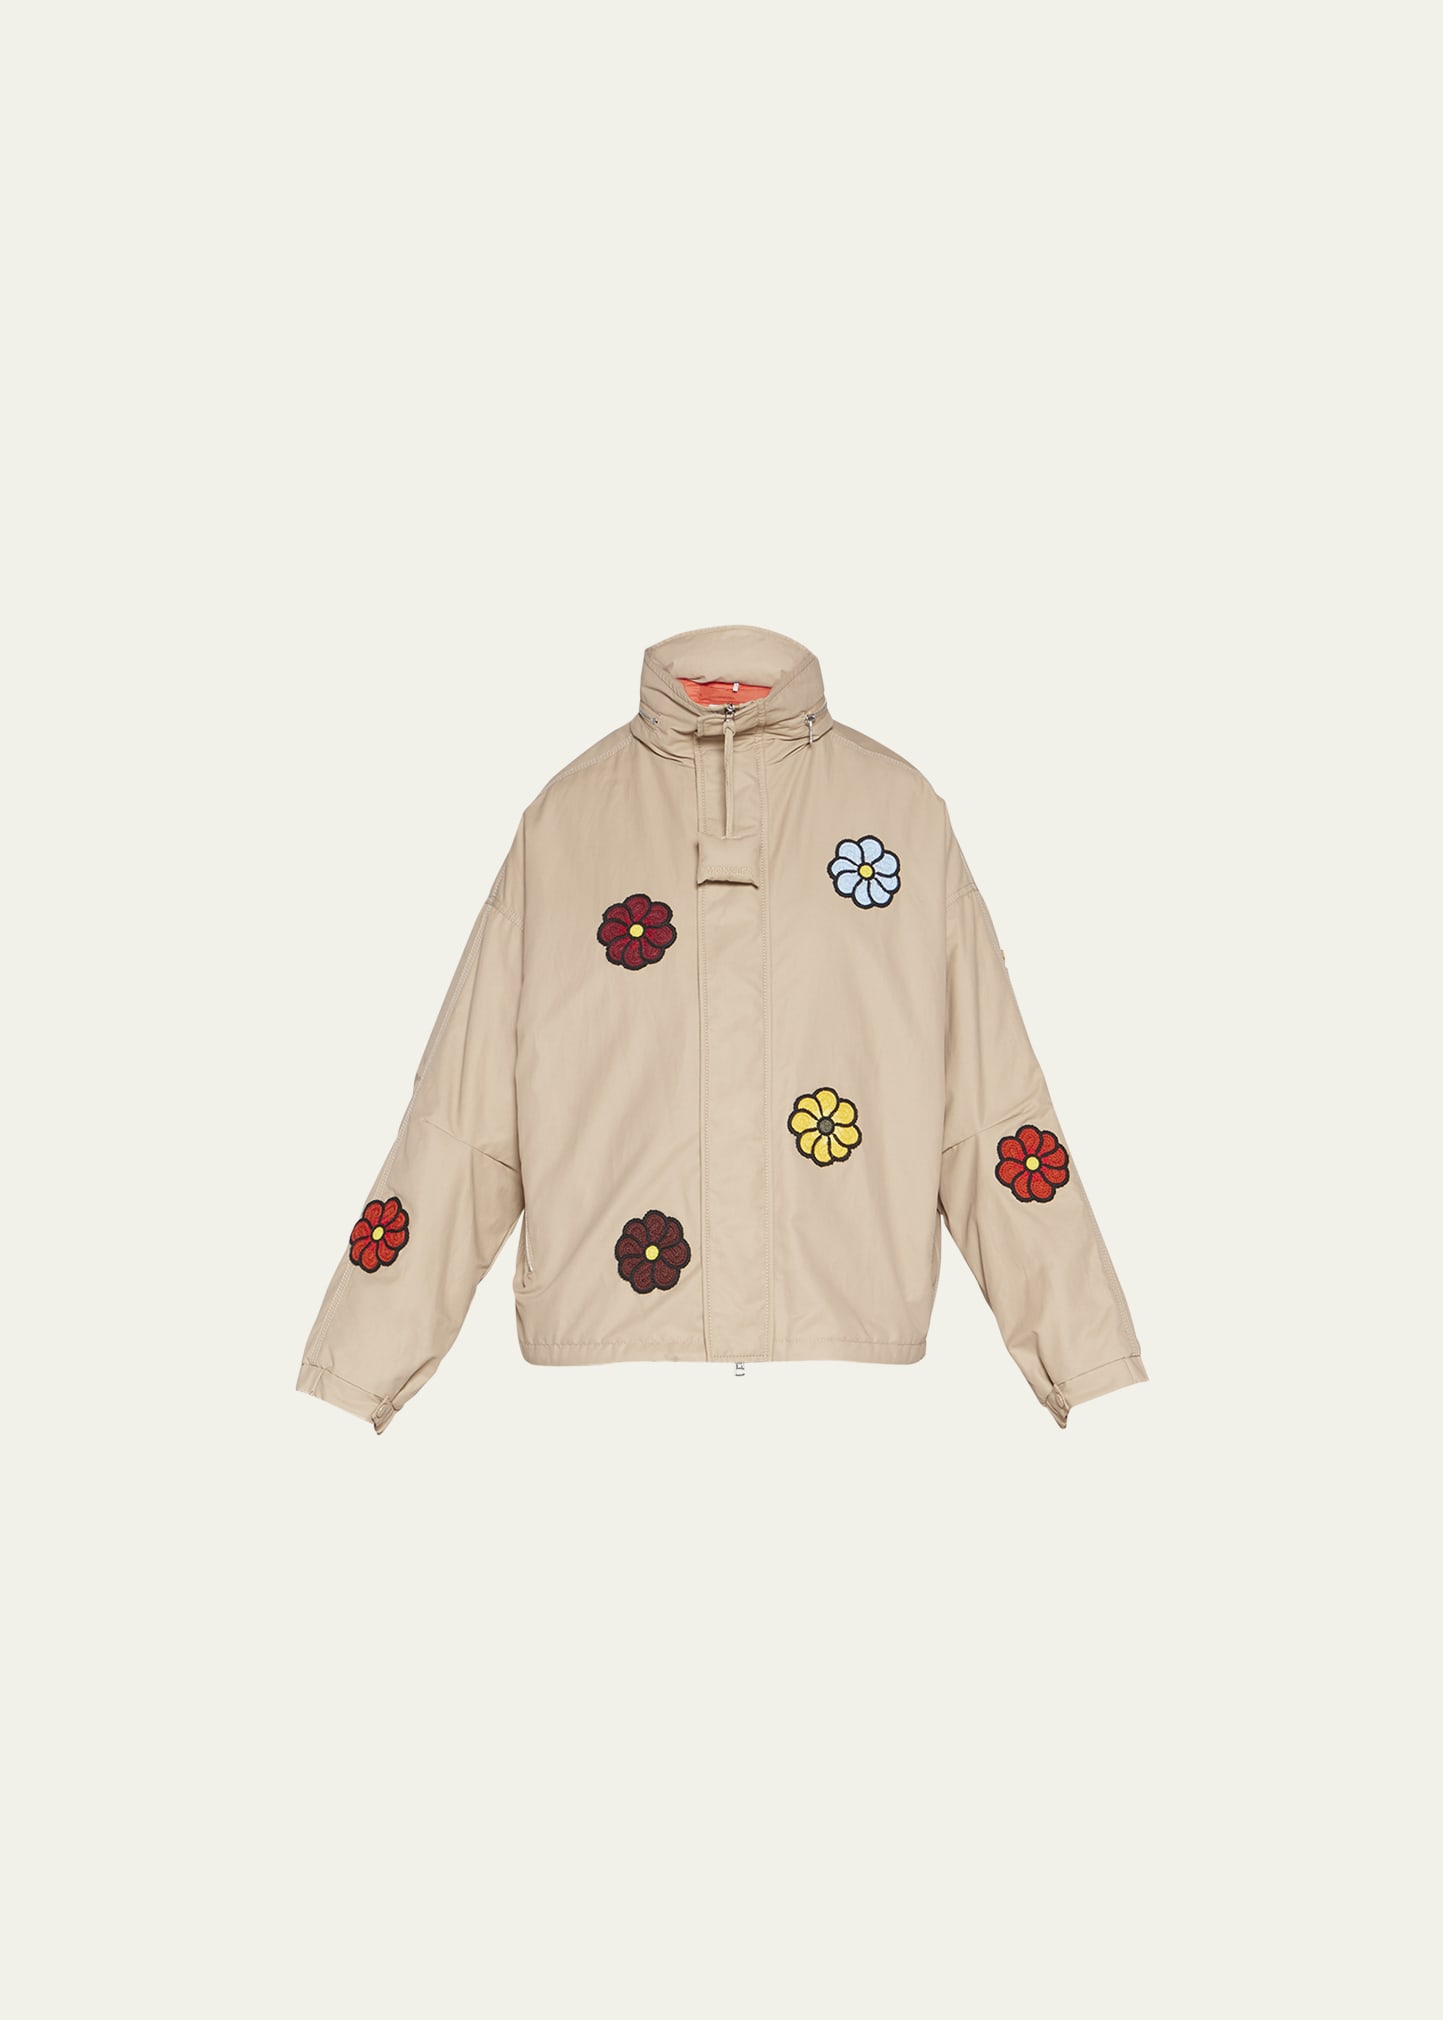 MONCLER GENIUS DELAMONT WINDBREAKER JACKET WITH FLORAL EMBROIDERY